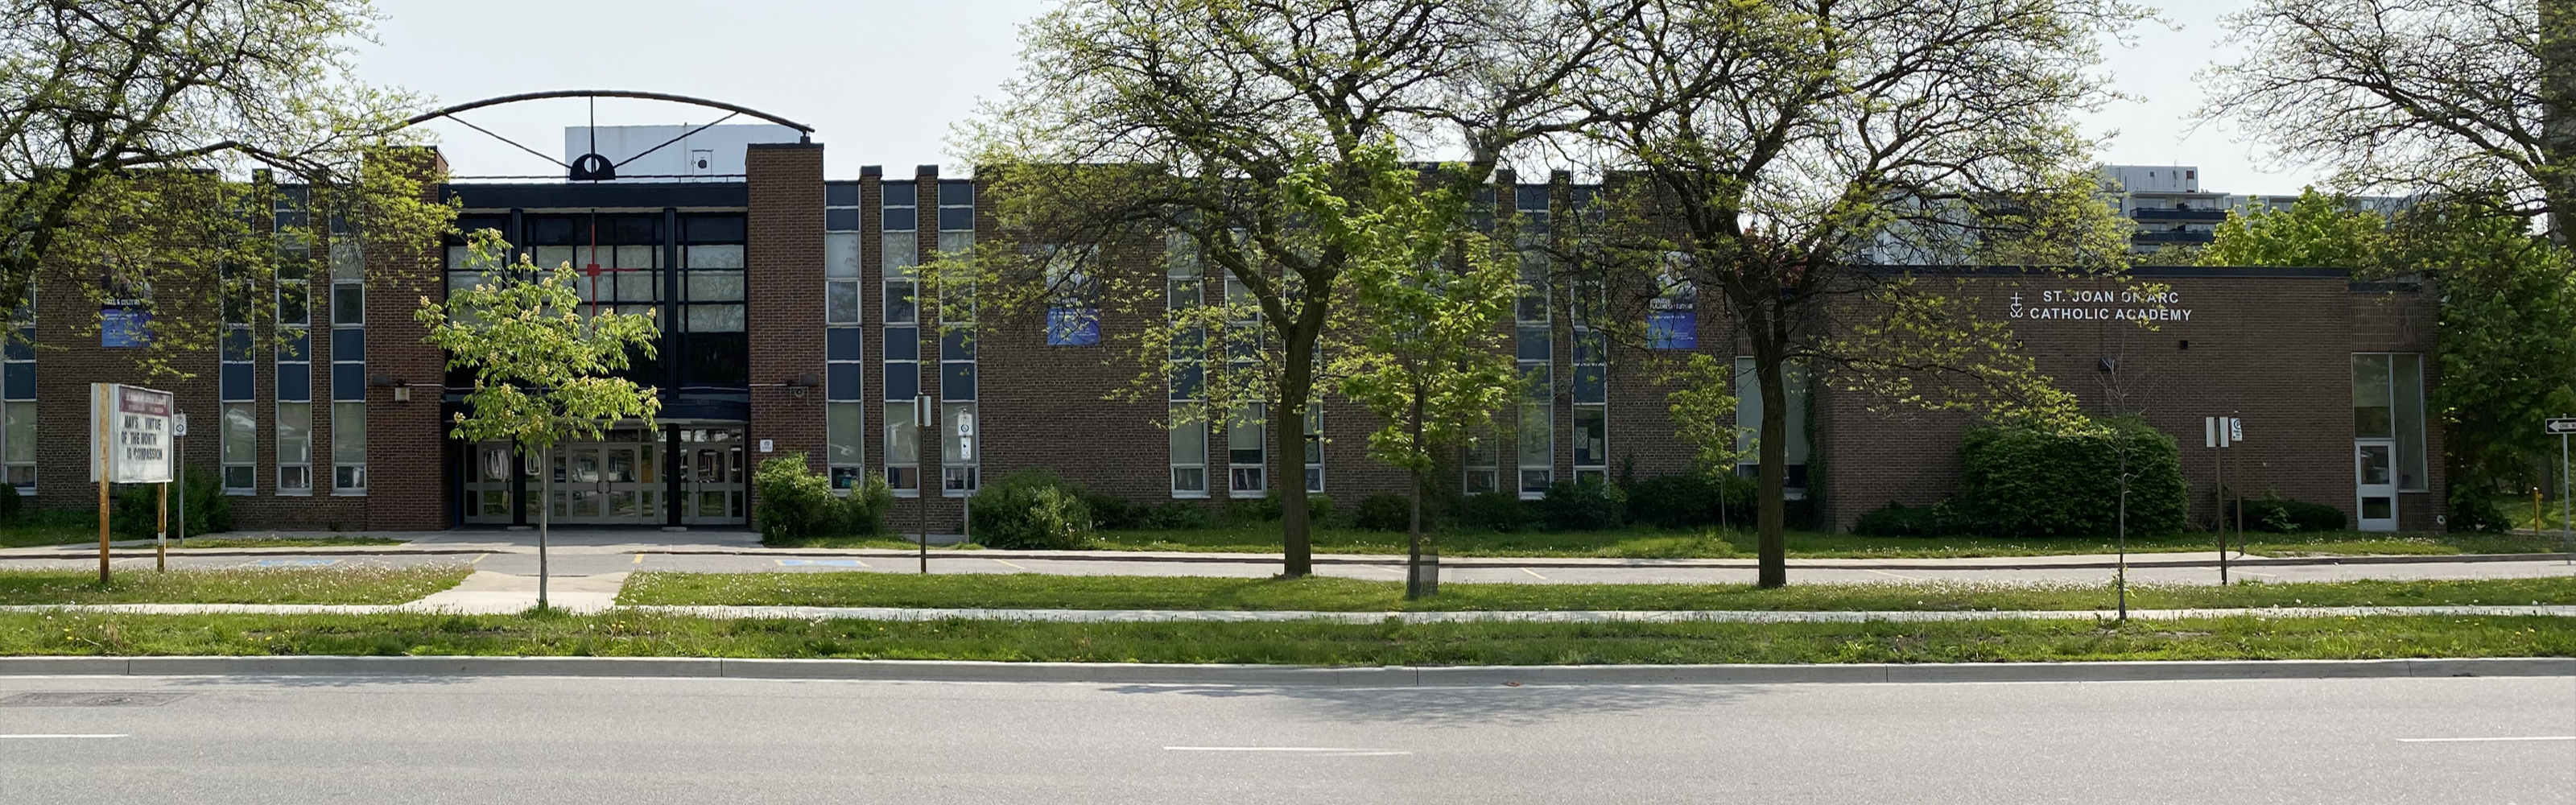 The front of the St. Joan of Arc Catholic Academy school building